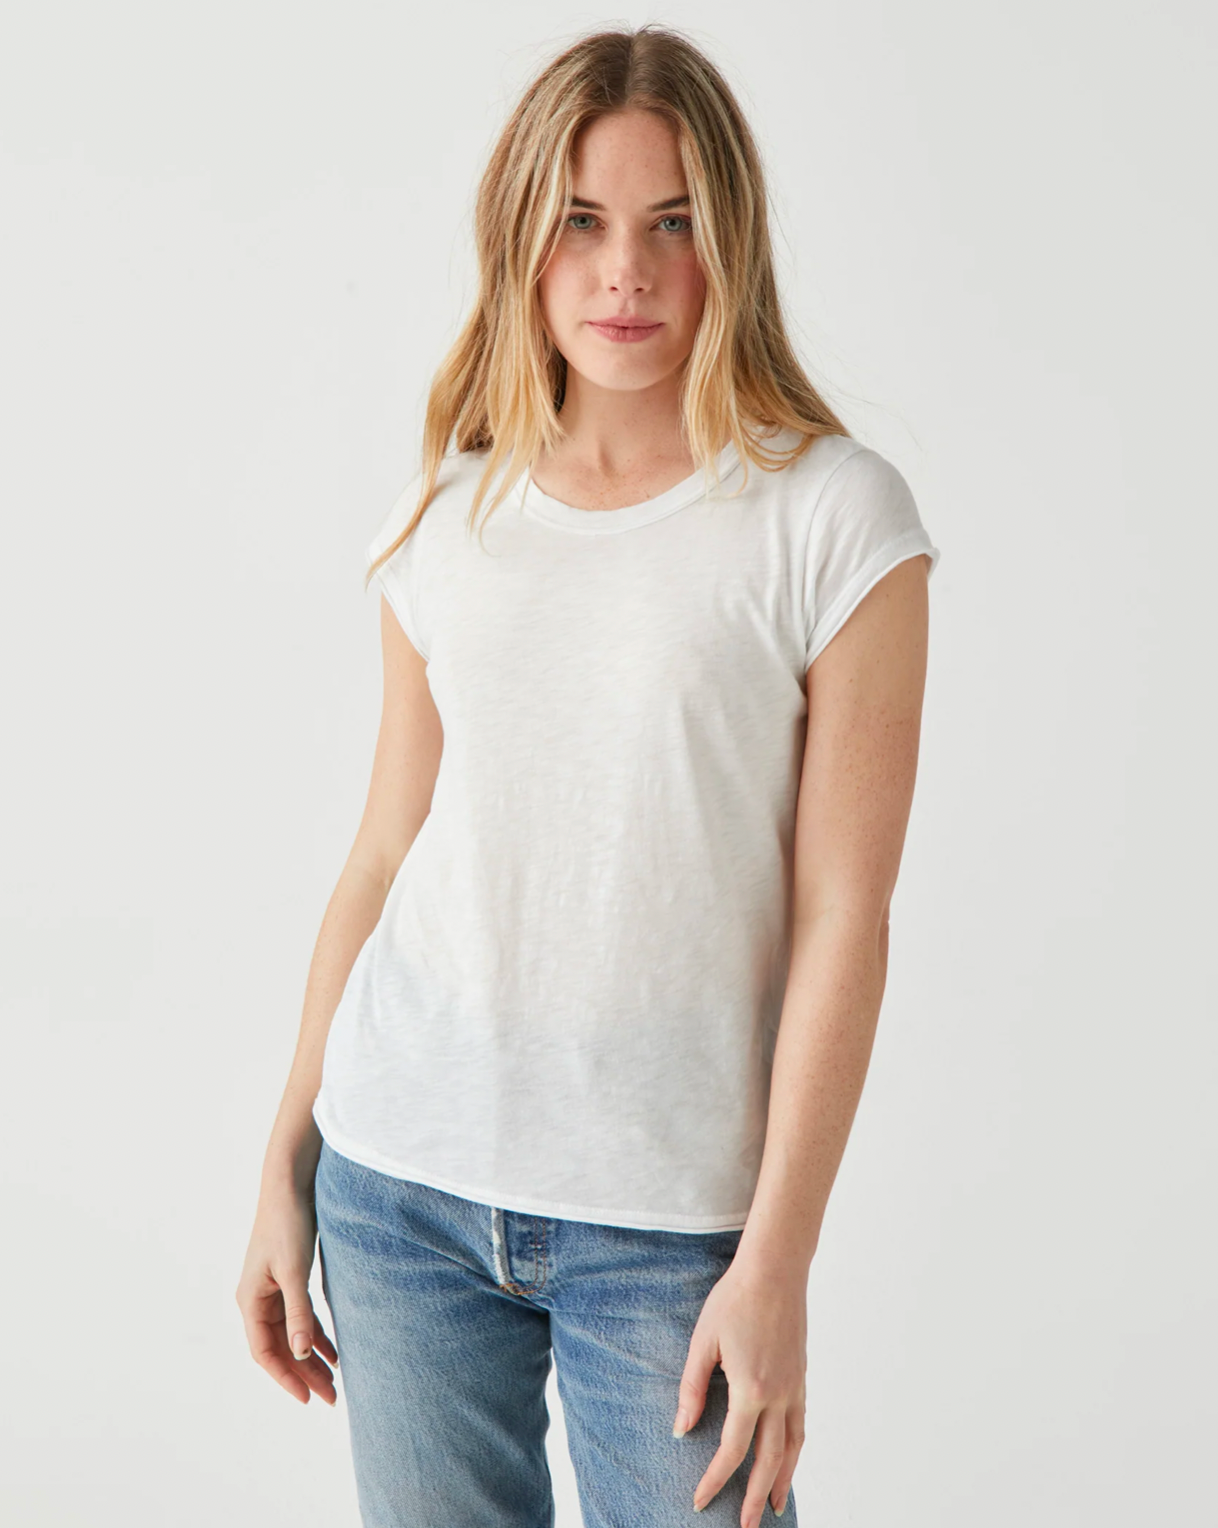 Model wearing Michael Stars trudy crew tee in white wearing jeans on a white background